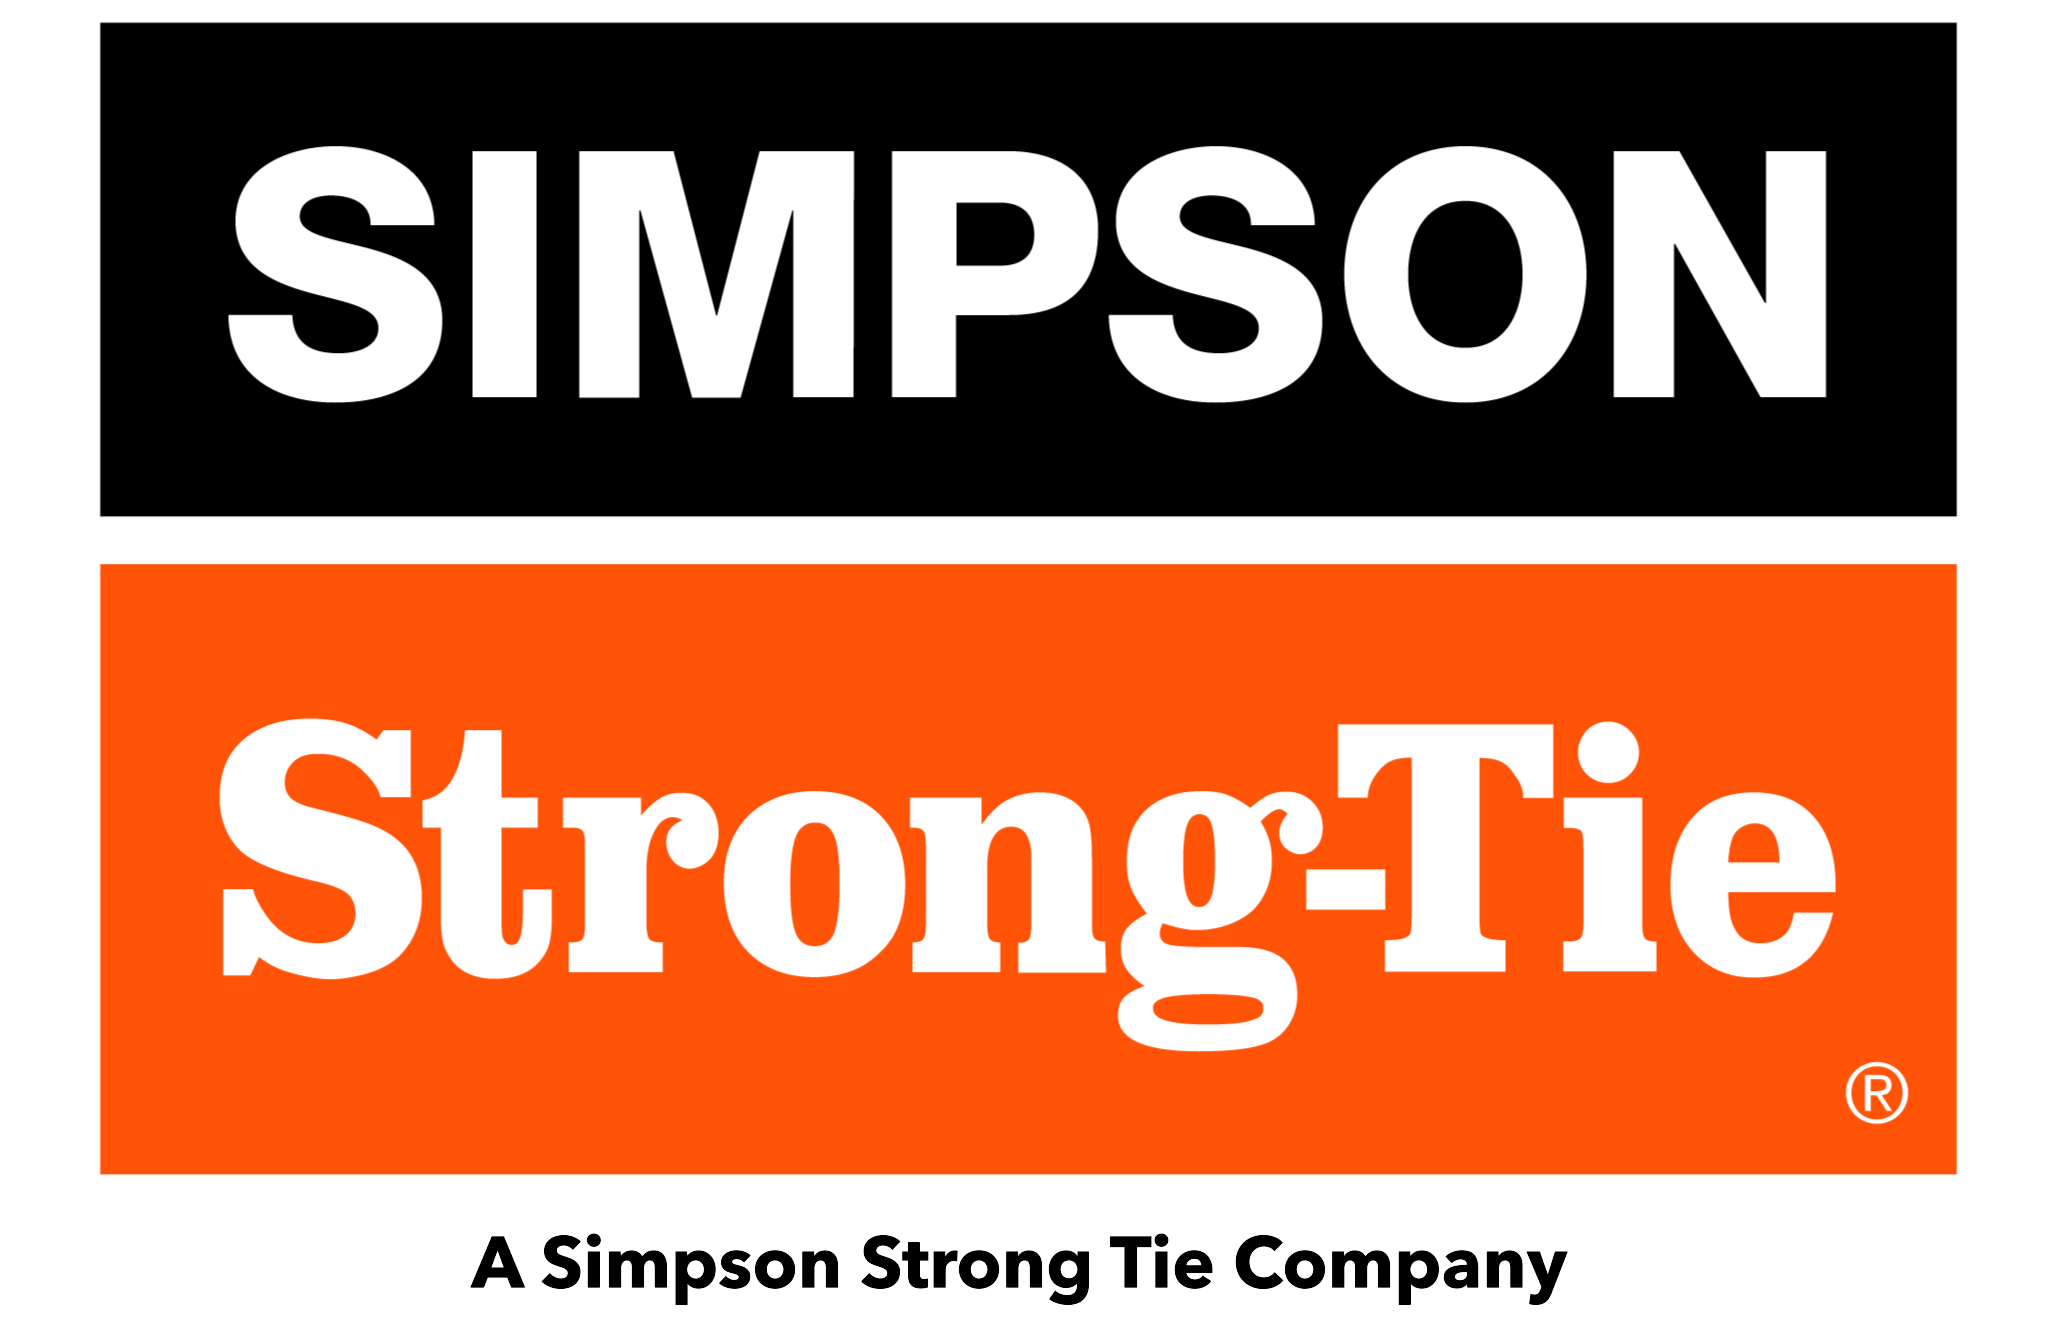 A Simpson Strong Tie Company